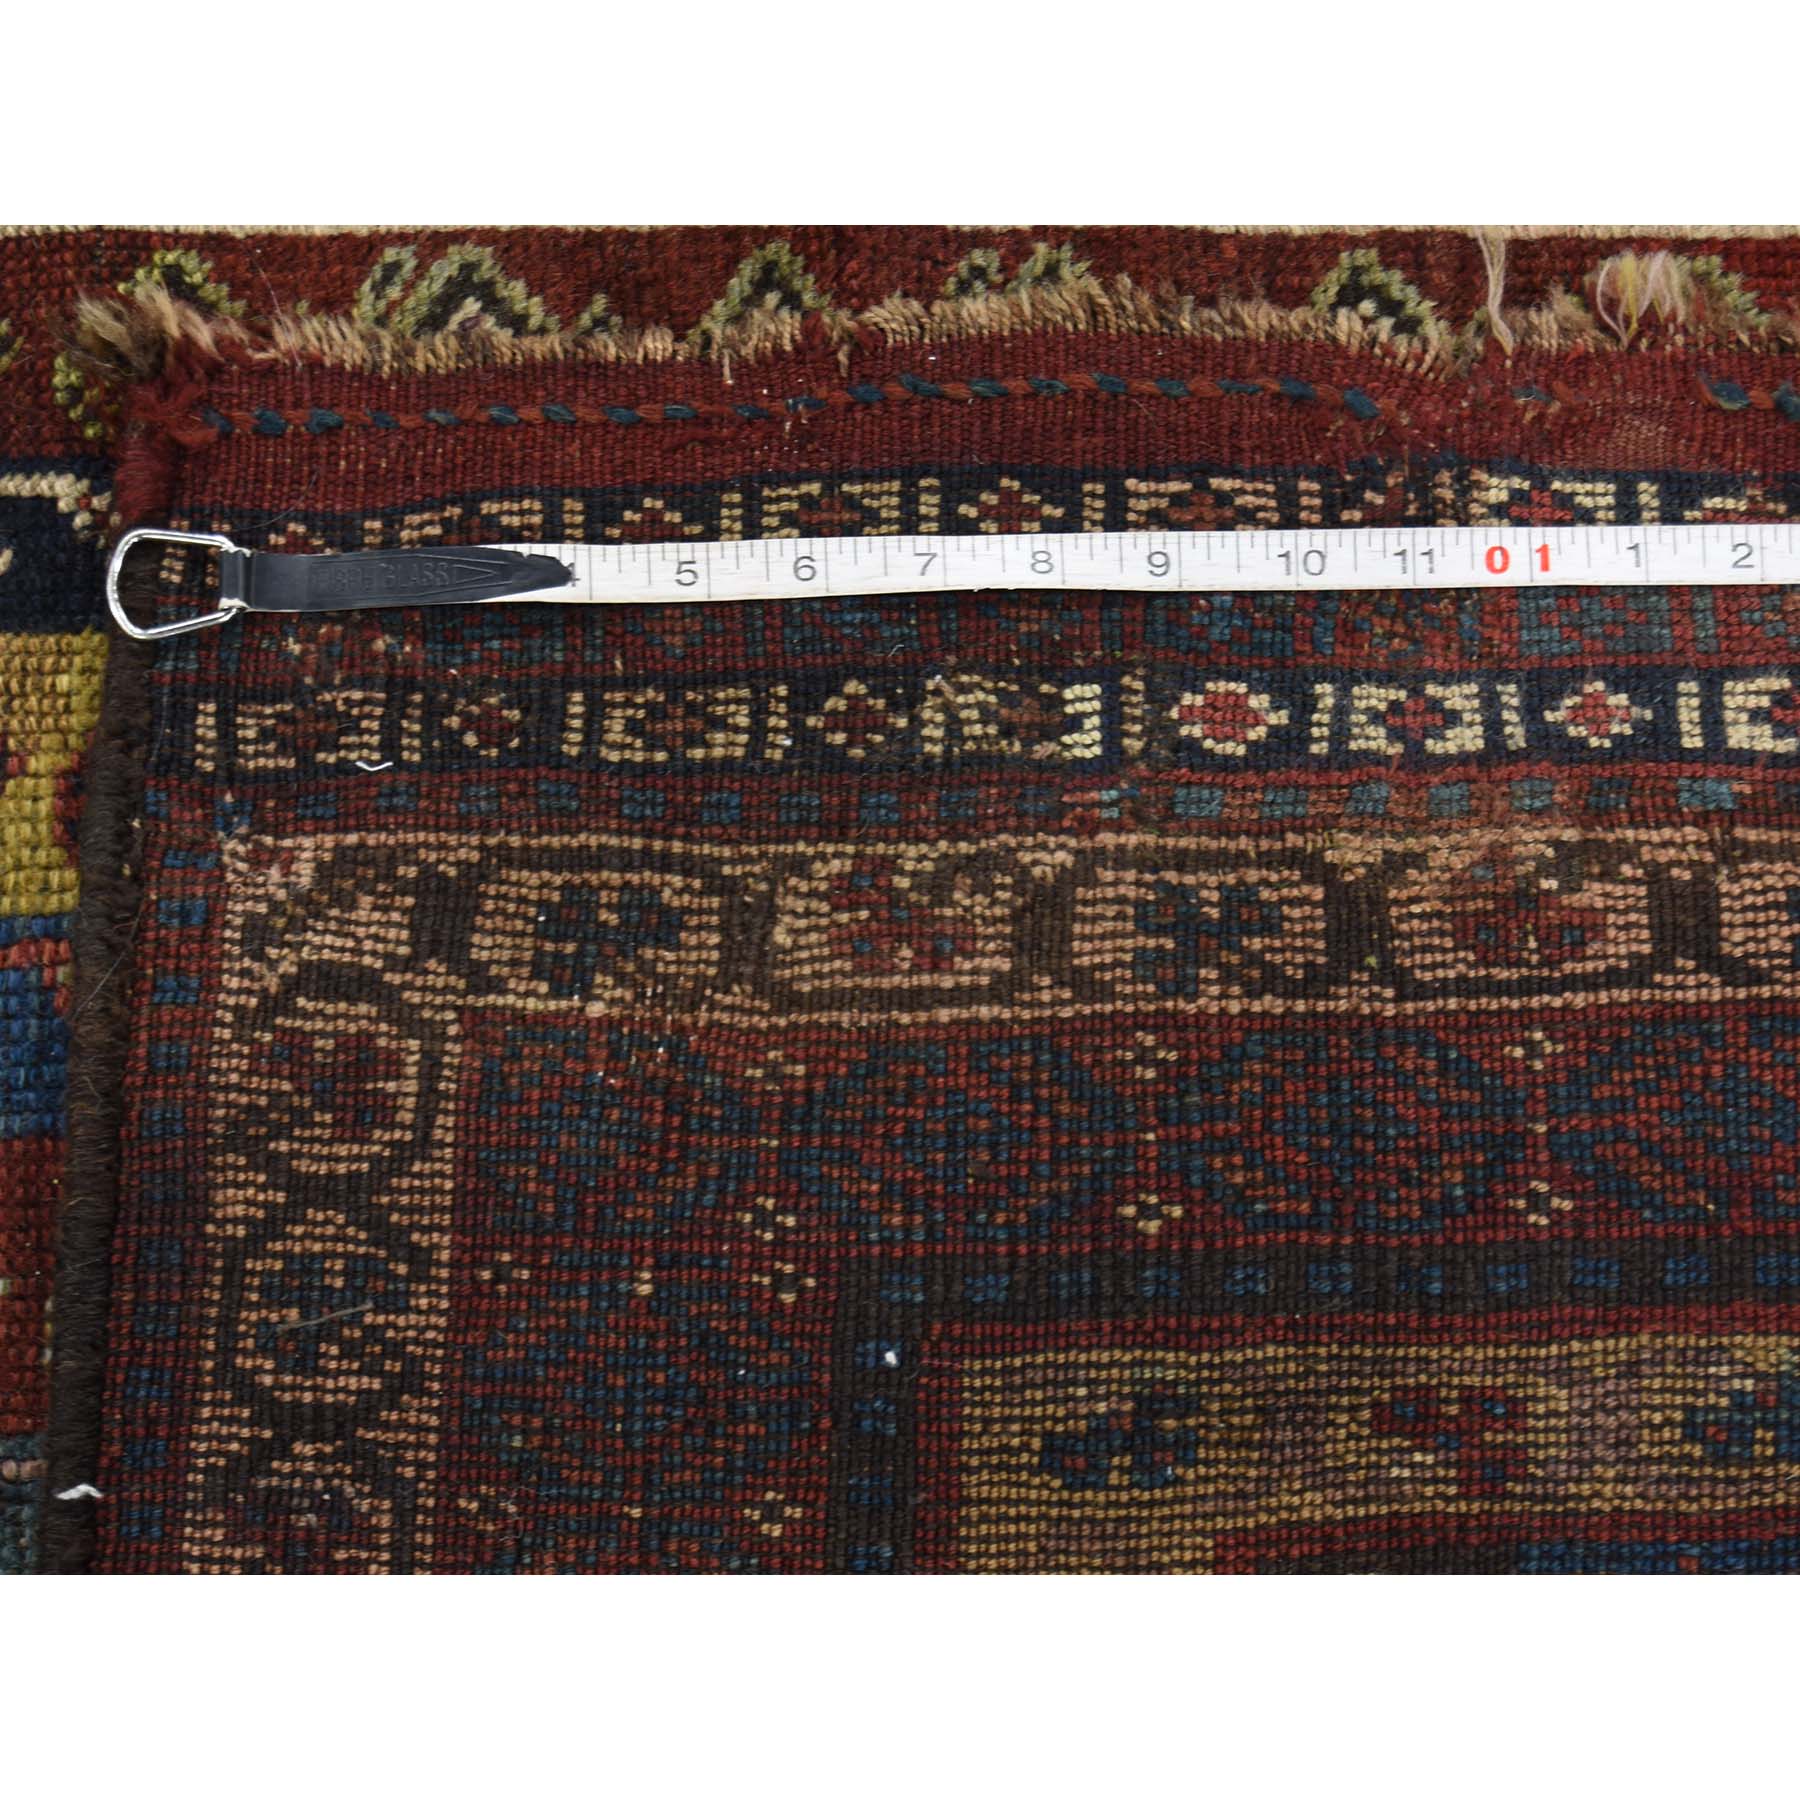 4-10 x11-8  Antique Persian Tribal Lori Buft With Shawl Design Wide Runner Hand-Knotted Oriental Rug 